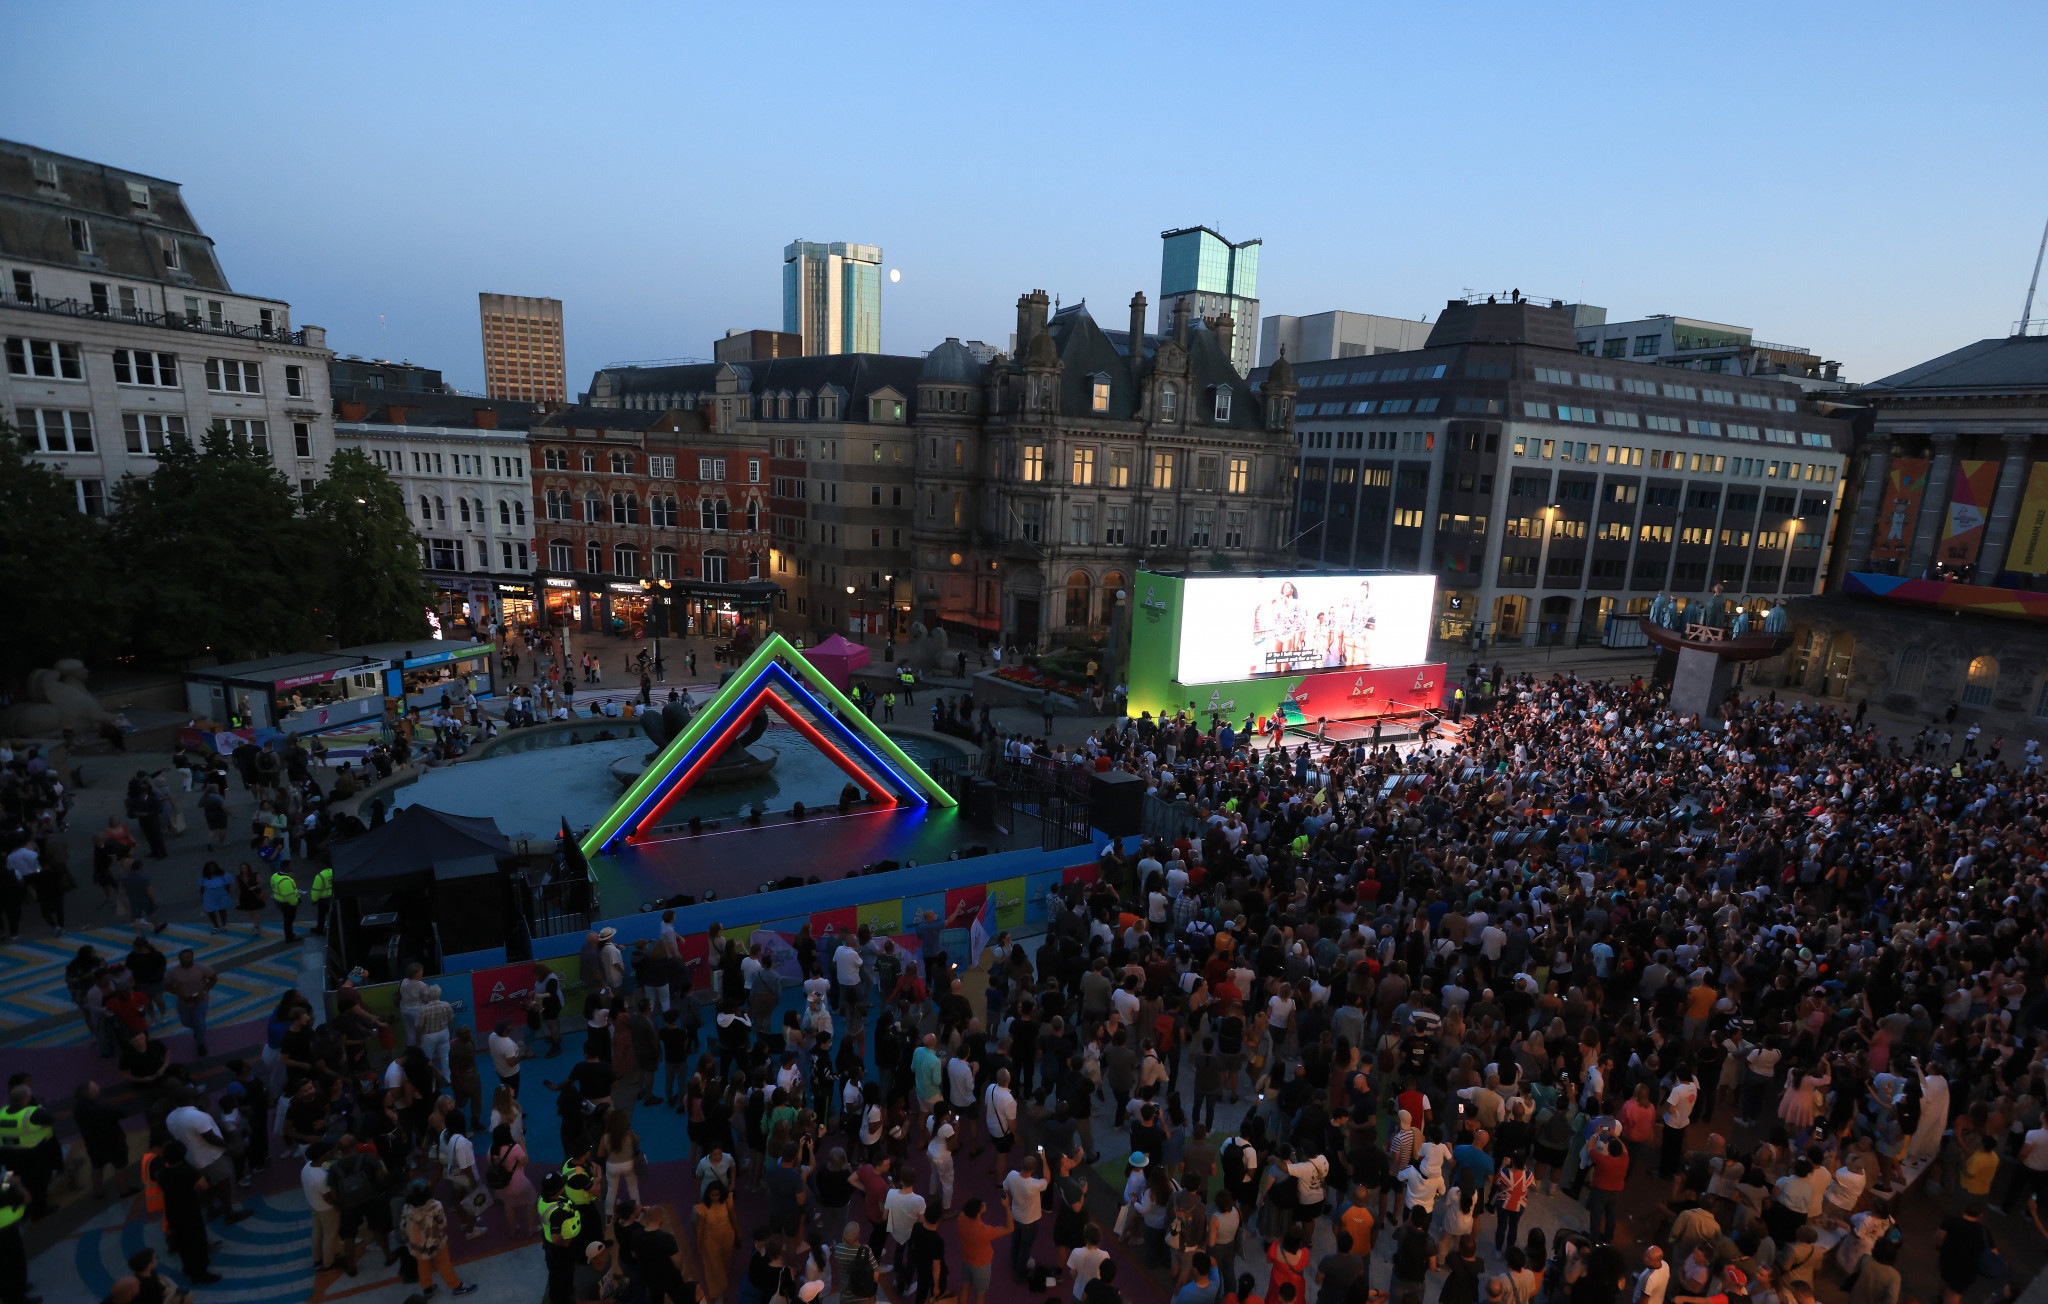 Fans who were unable to get to the Alexander Stadium watched the Closing Ceremony at Victoria Square ©Getty Images